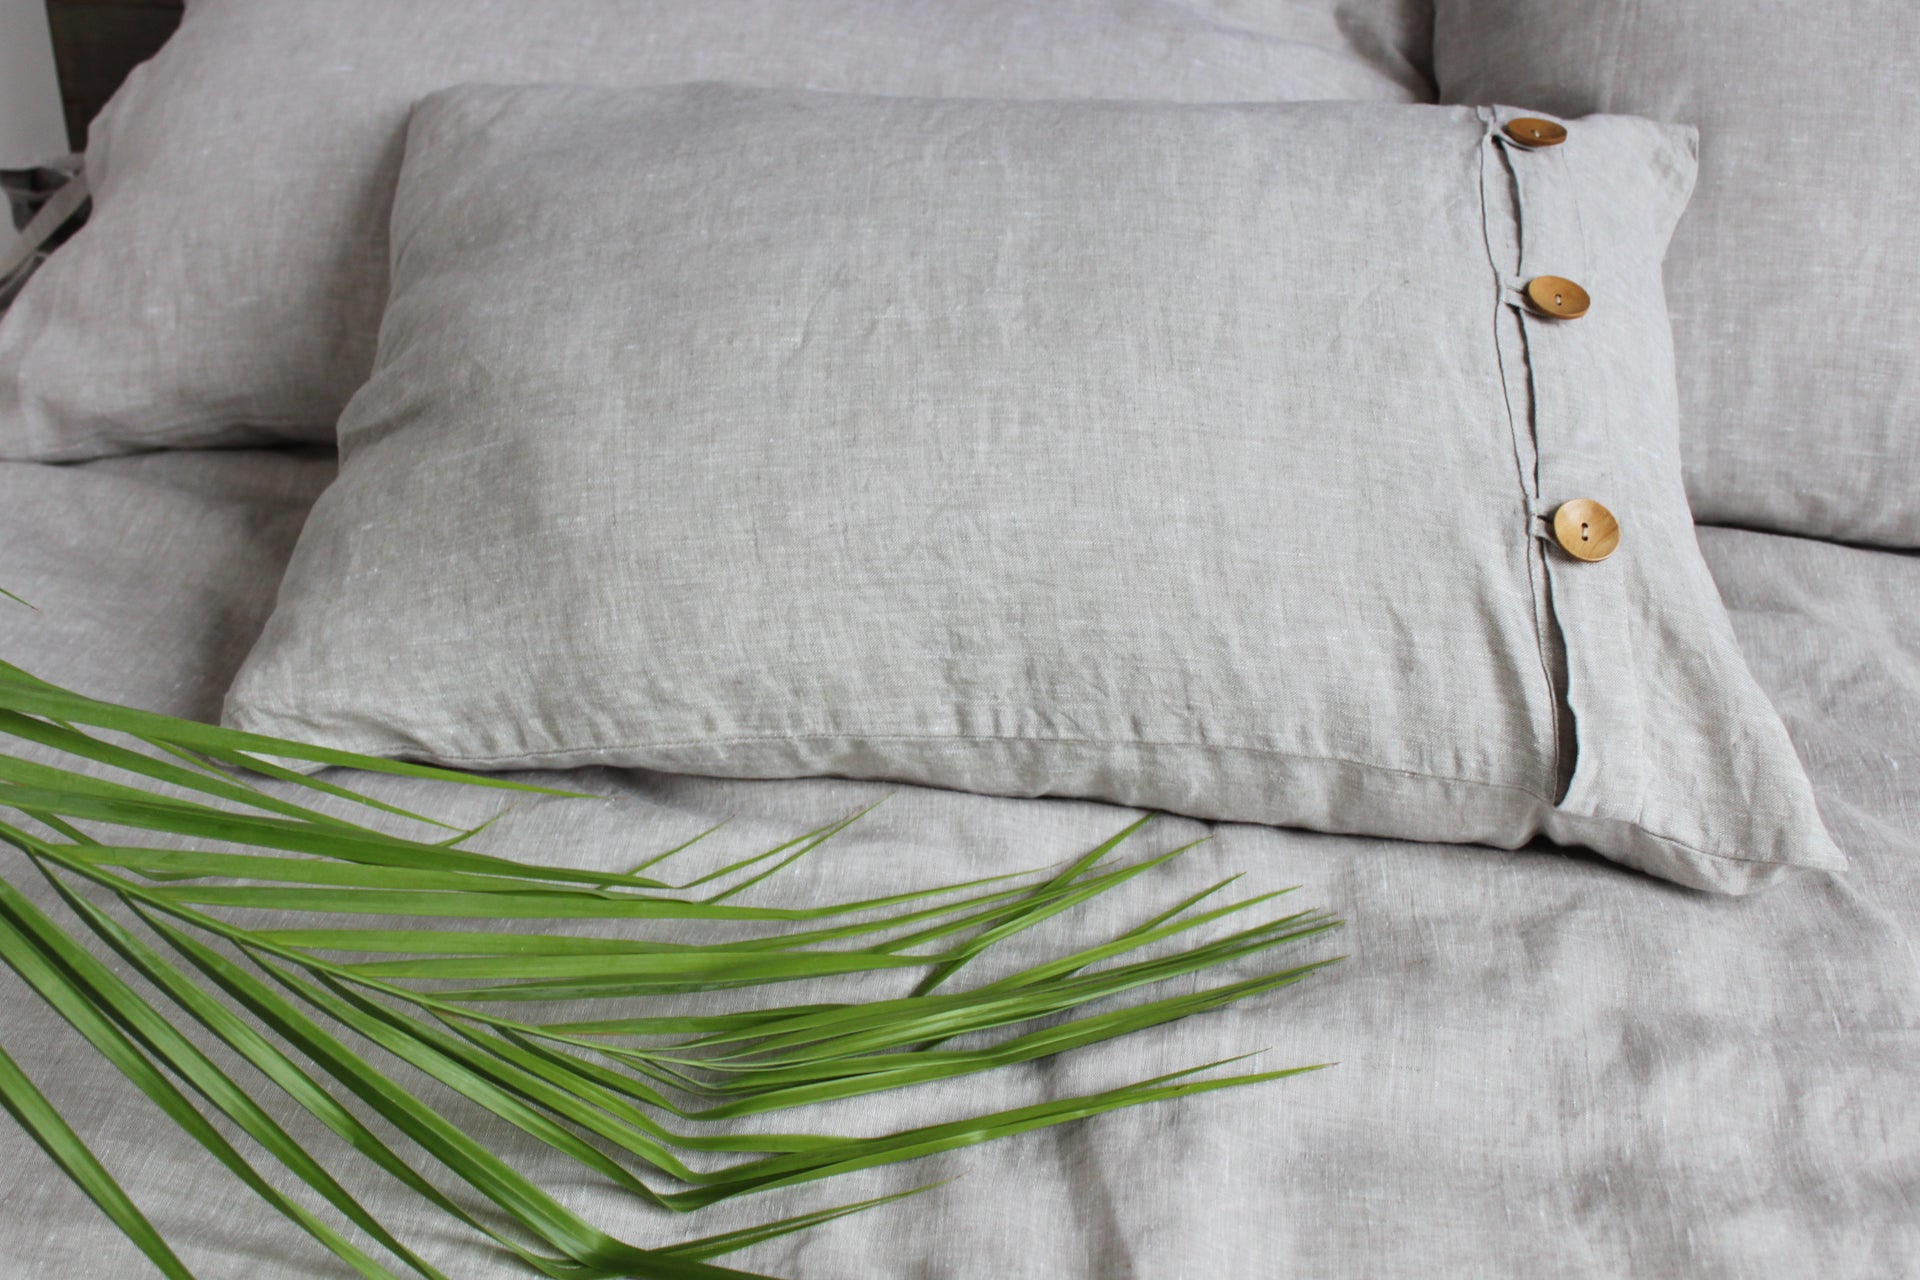 Cottage Chic Natural Linen Pillow Sham with Side Wooden Buttons Decor